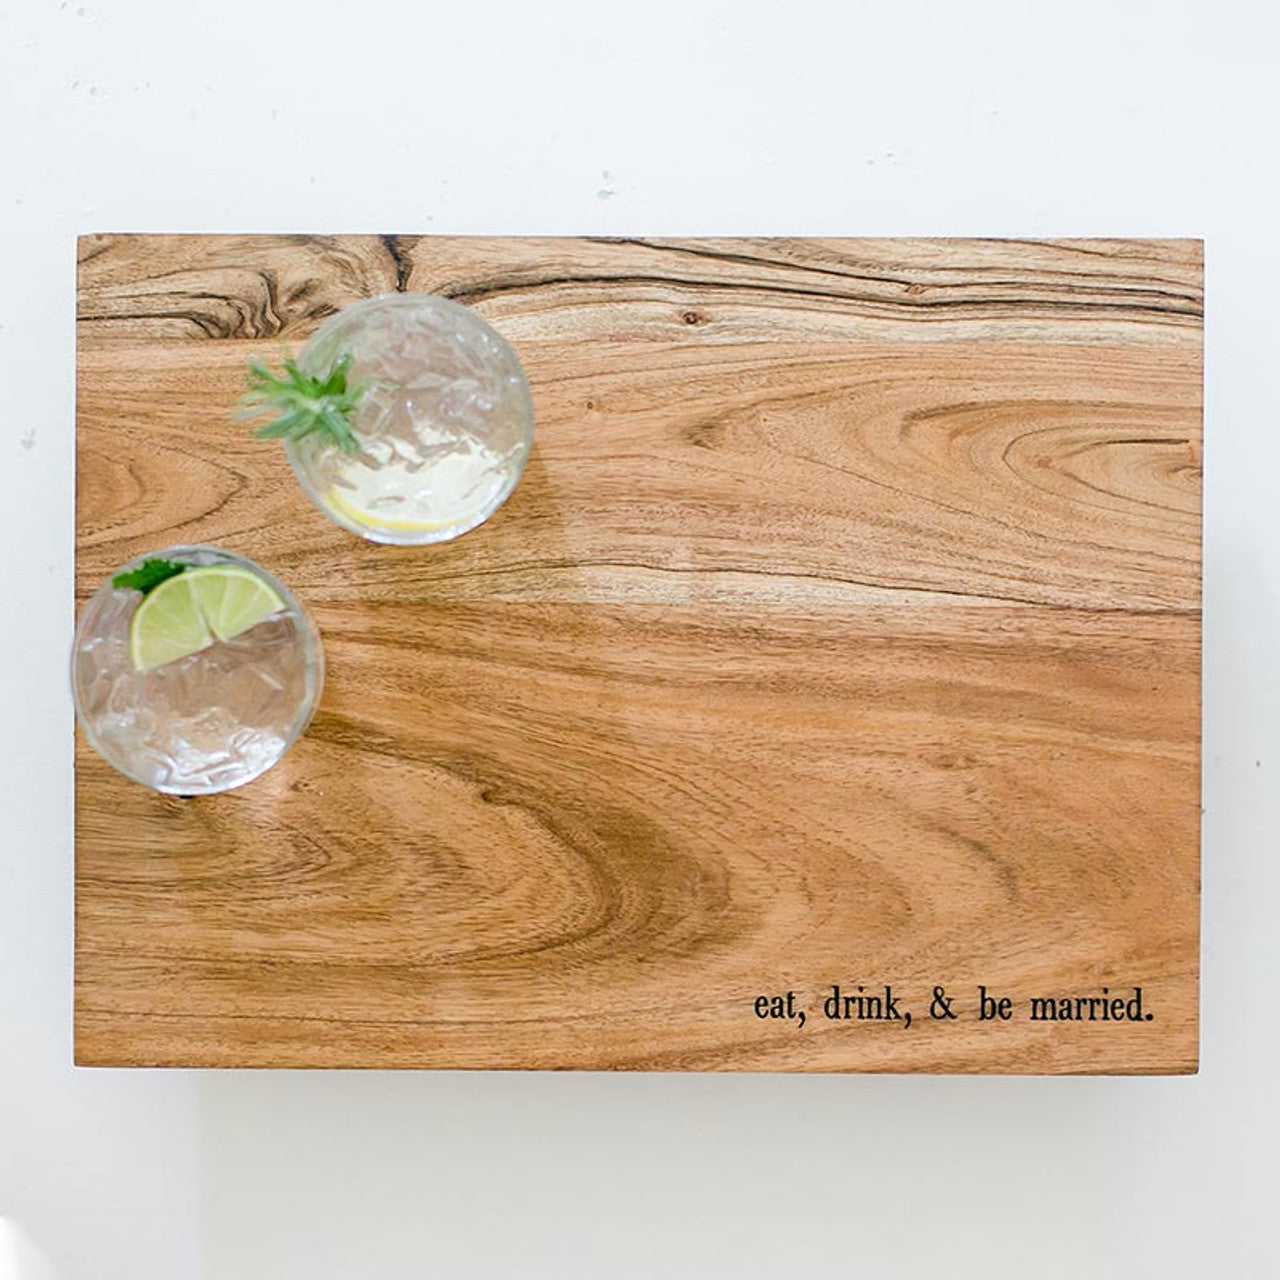 Face to Face Serving Tray - Eat, Drink & Be Married